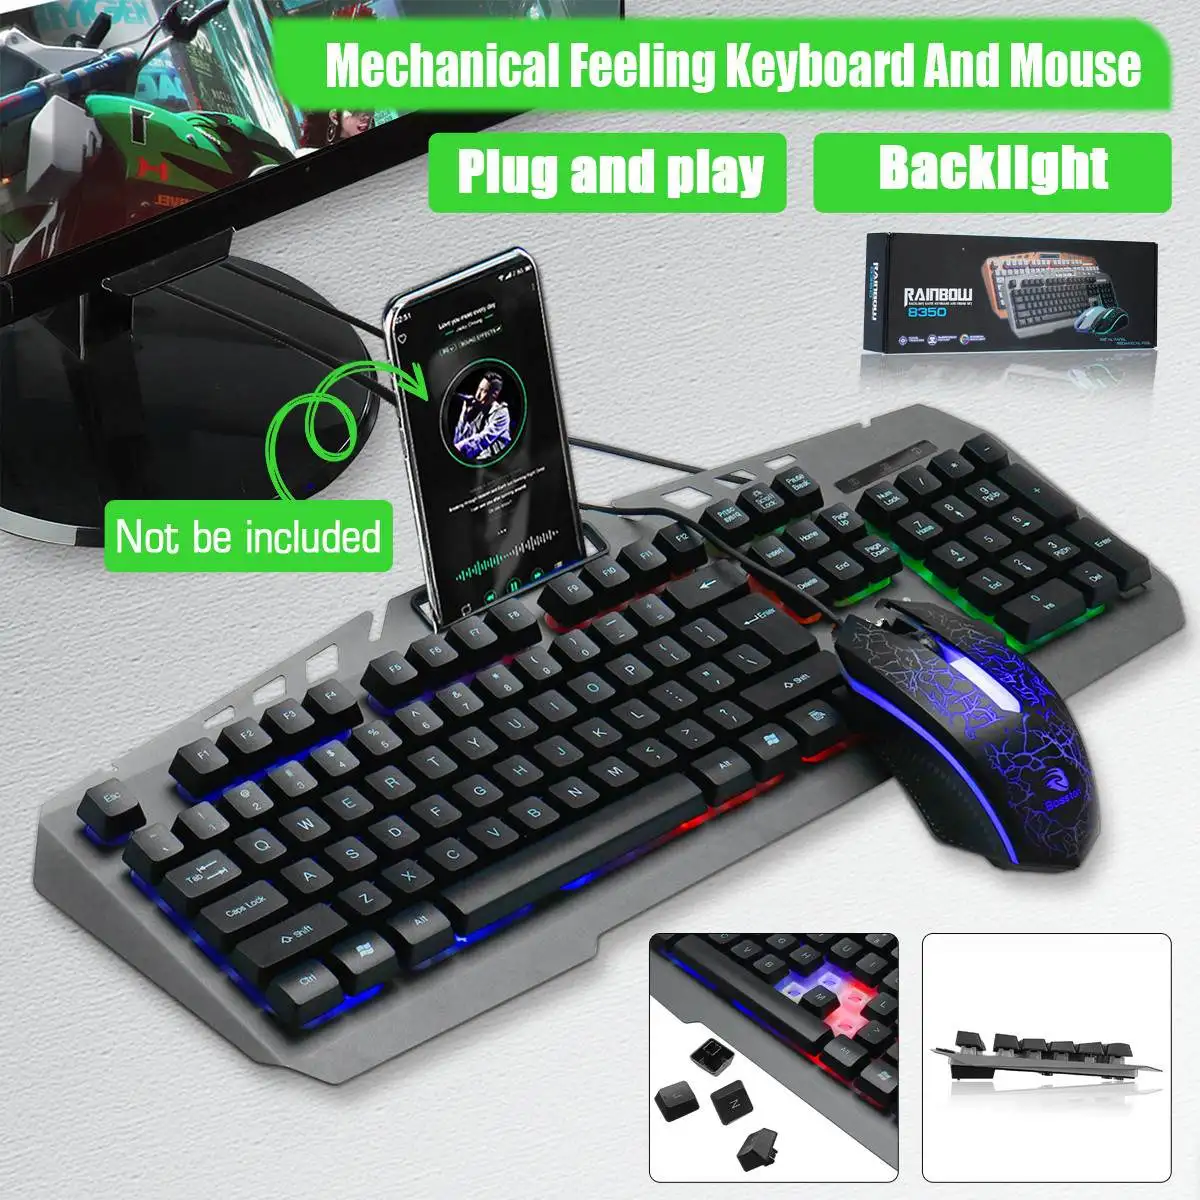 

Hovering Mechanical Feeling Keyboard USB Wired Waterproof Keyboard New Backlit Gaming Keyboard and Mouse Set